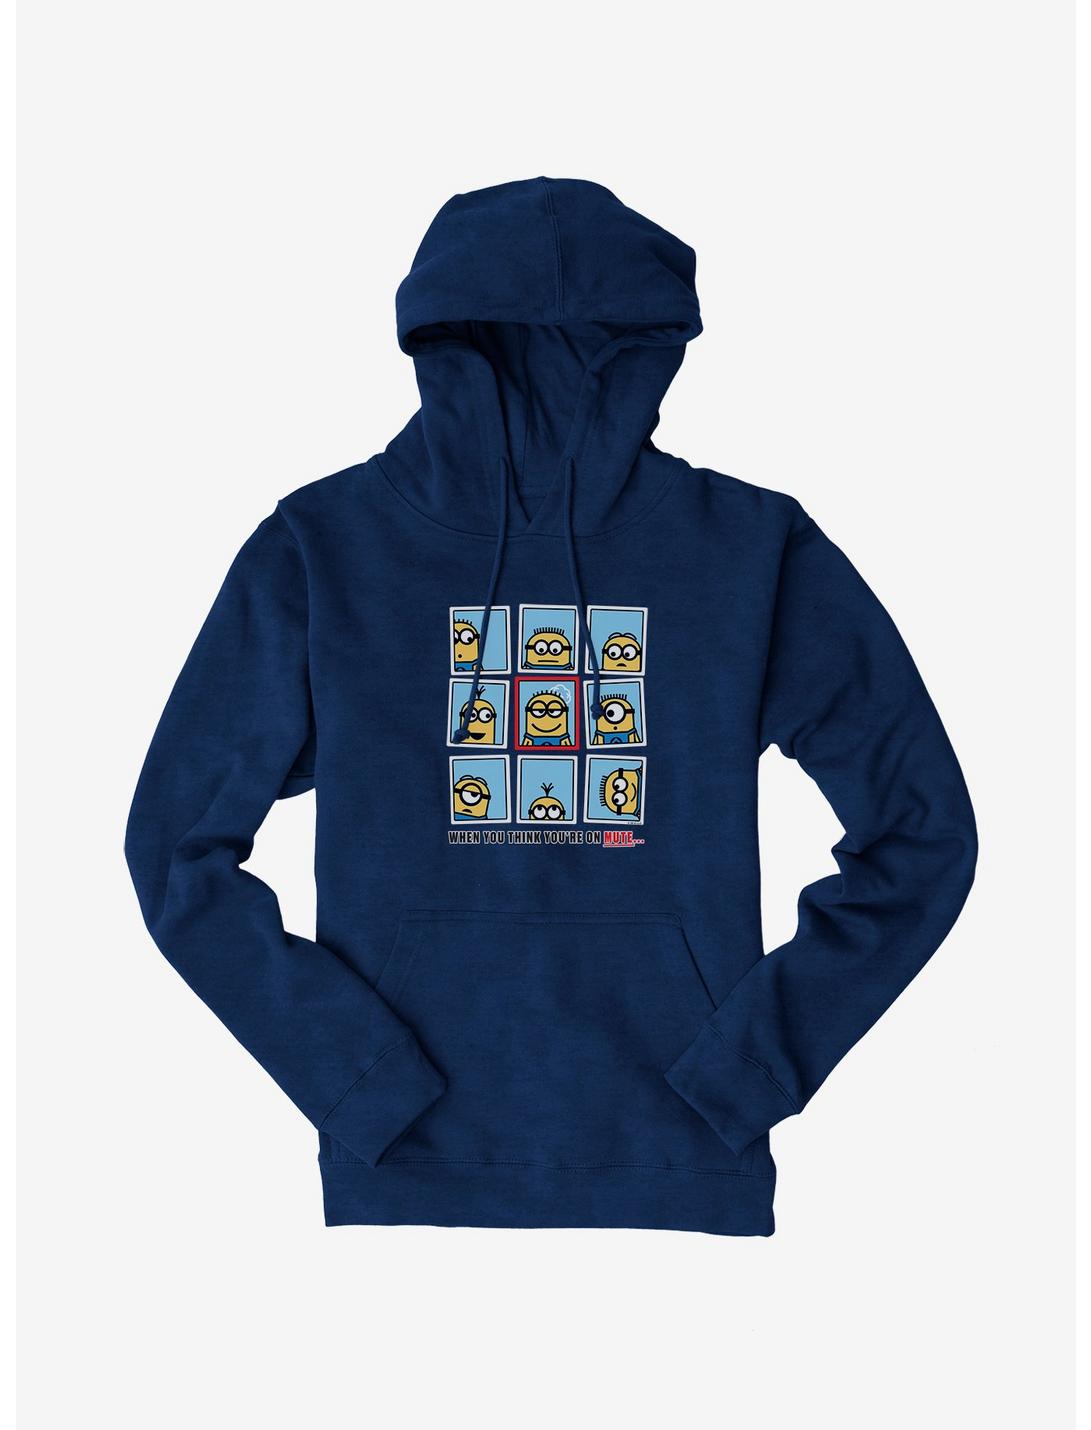 Minions When You Think You're On Mute Hoodie, NAVY, hi-res